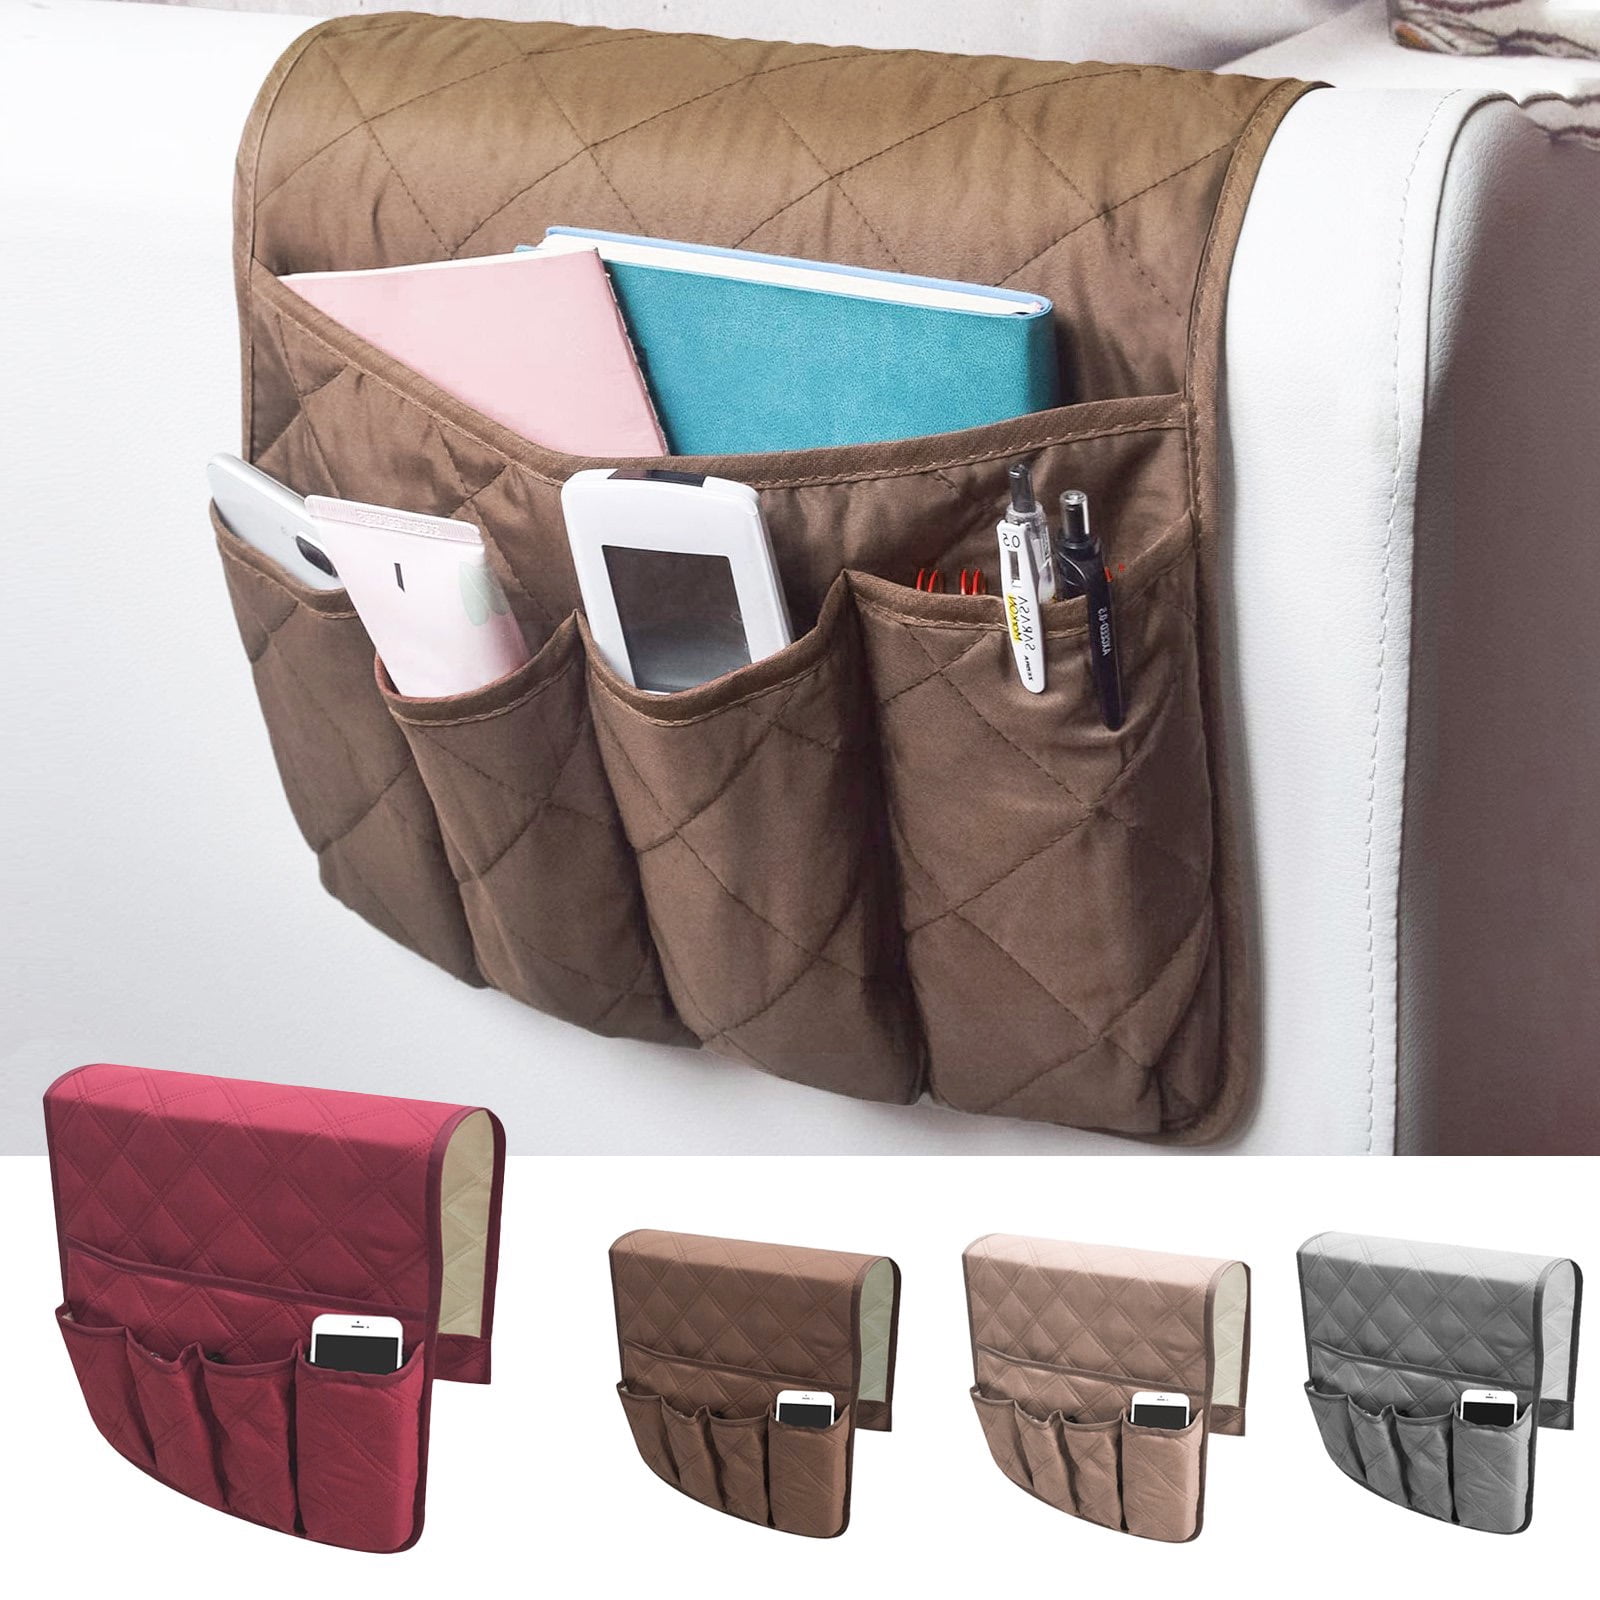 Space Saver Bag Sofa Armrest Organizer Cloth Storage Pouch Holder for Cellphone Magazines Glasses TV Remote Control Anti-Slip Caddy Pocket for Couch Armchair Grey 